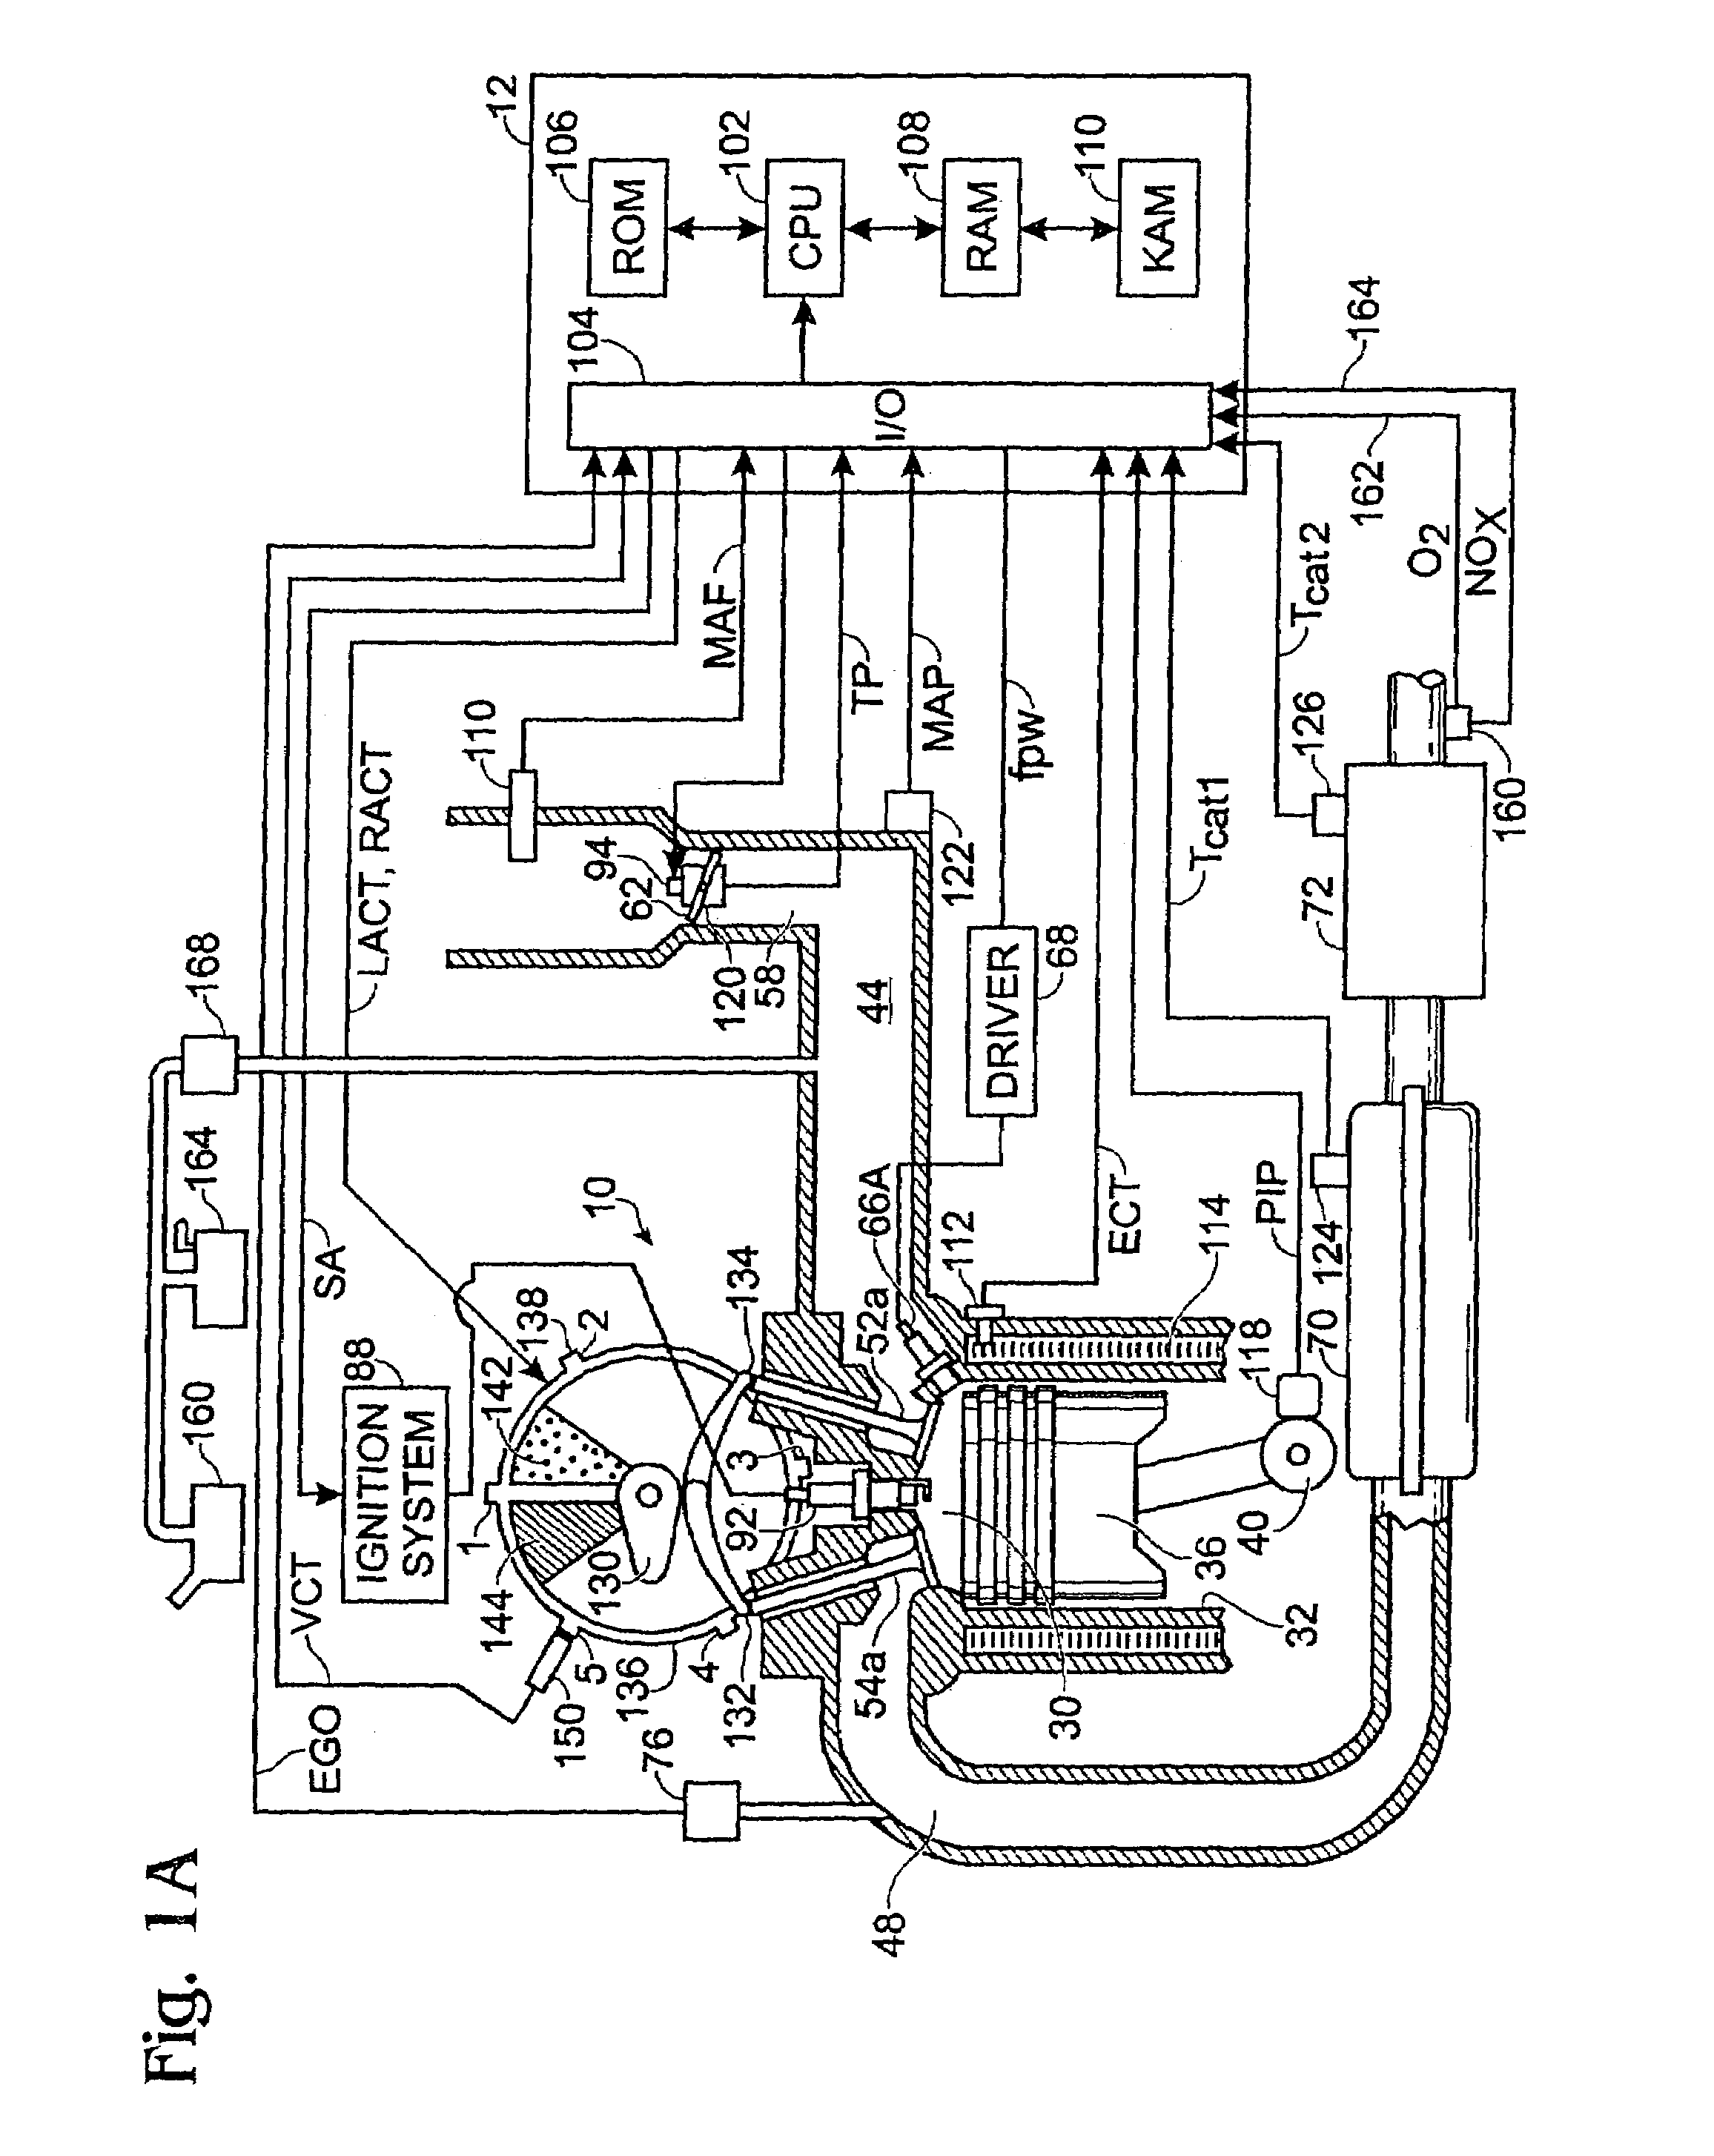 System and method for controlling valve timing of an engine with cylinder deactivation